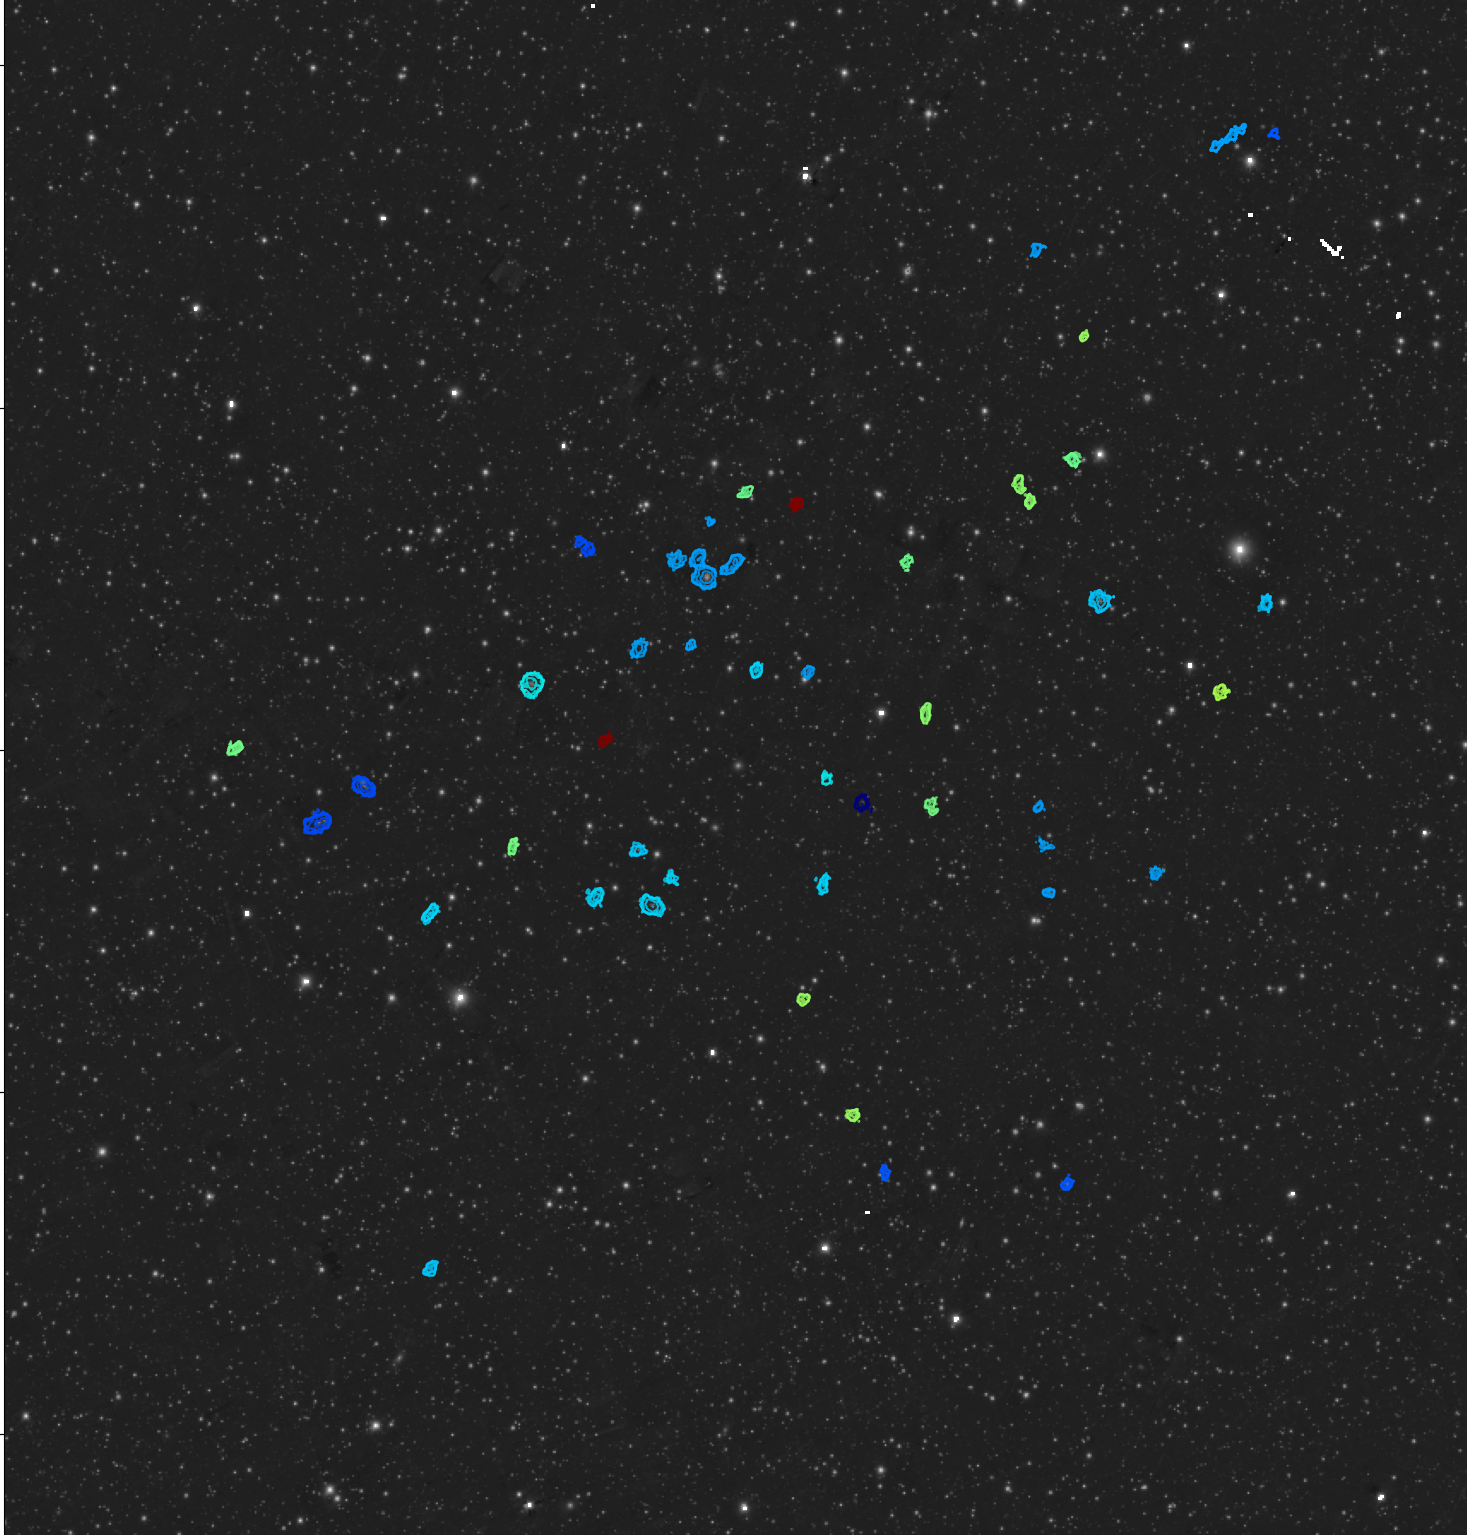 Astronomers find 49 galaxies in under three hours